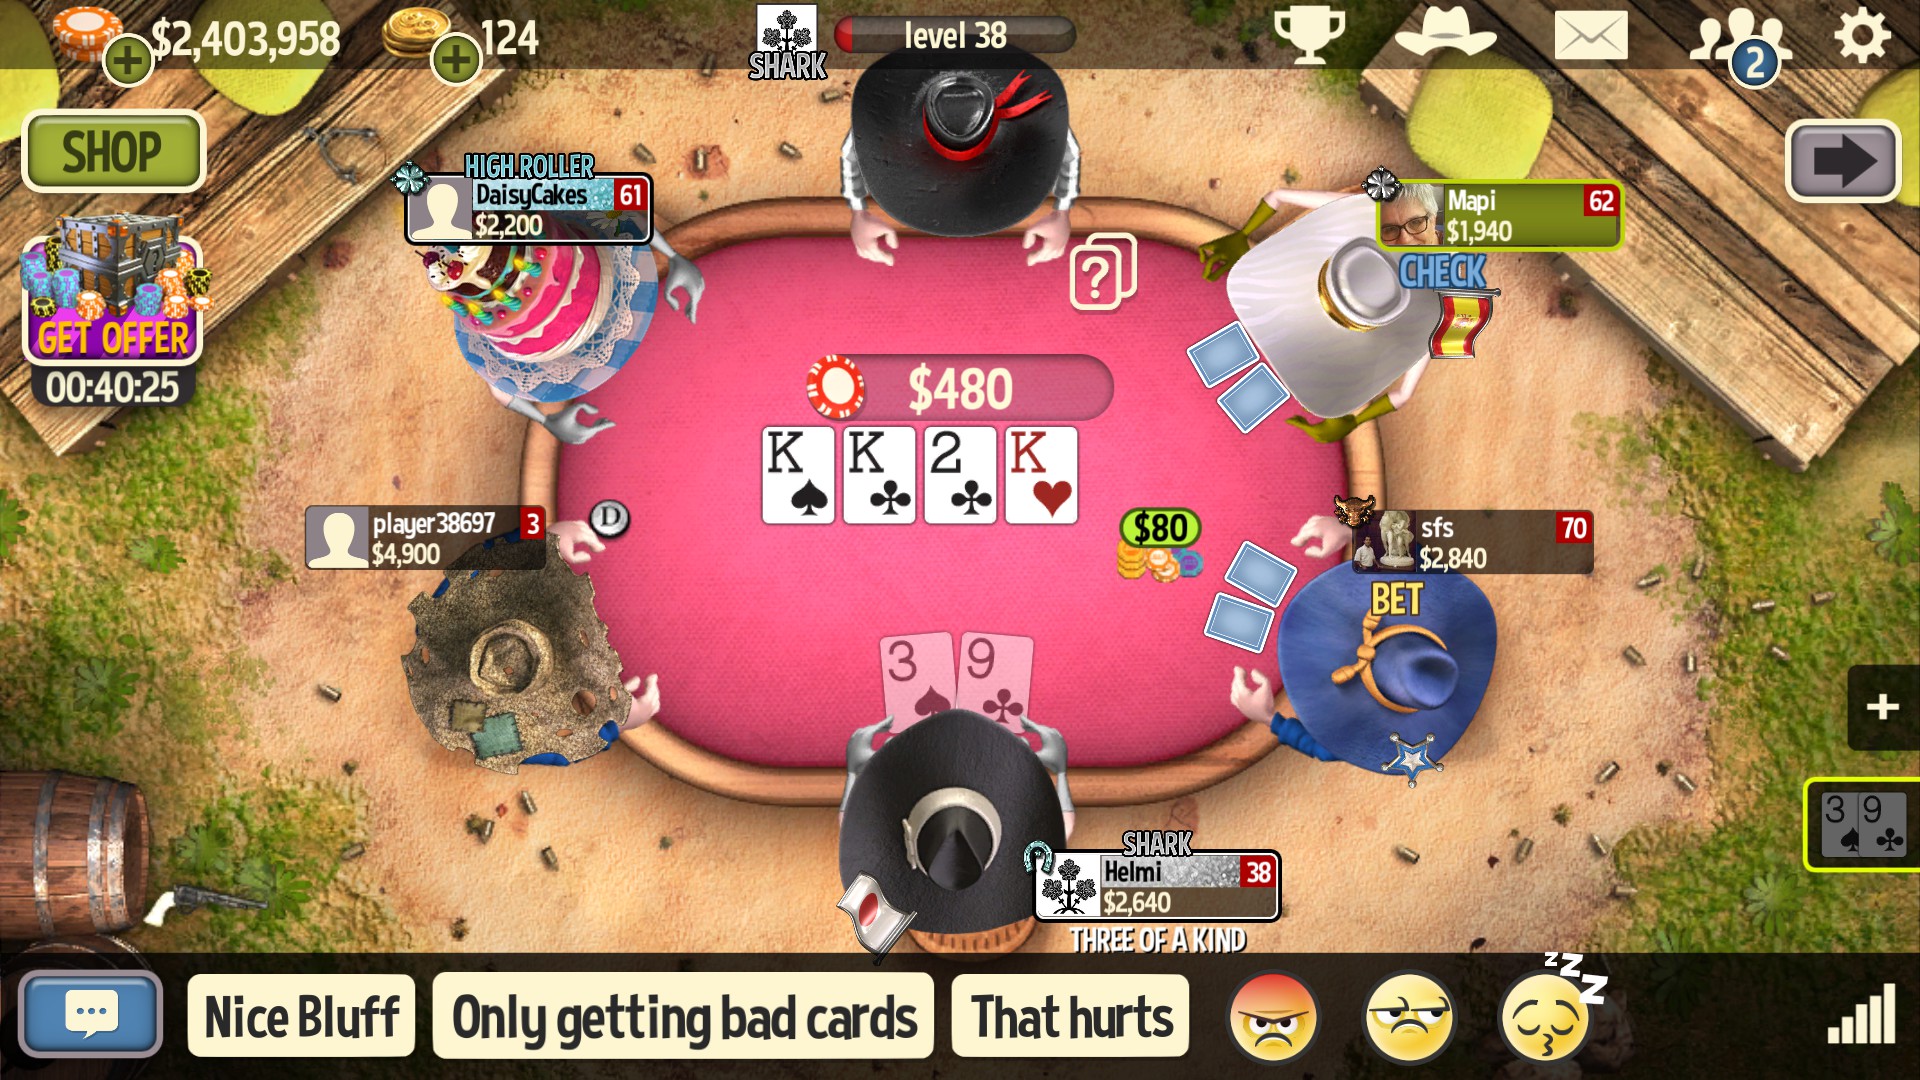 governor of poker 3 free